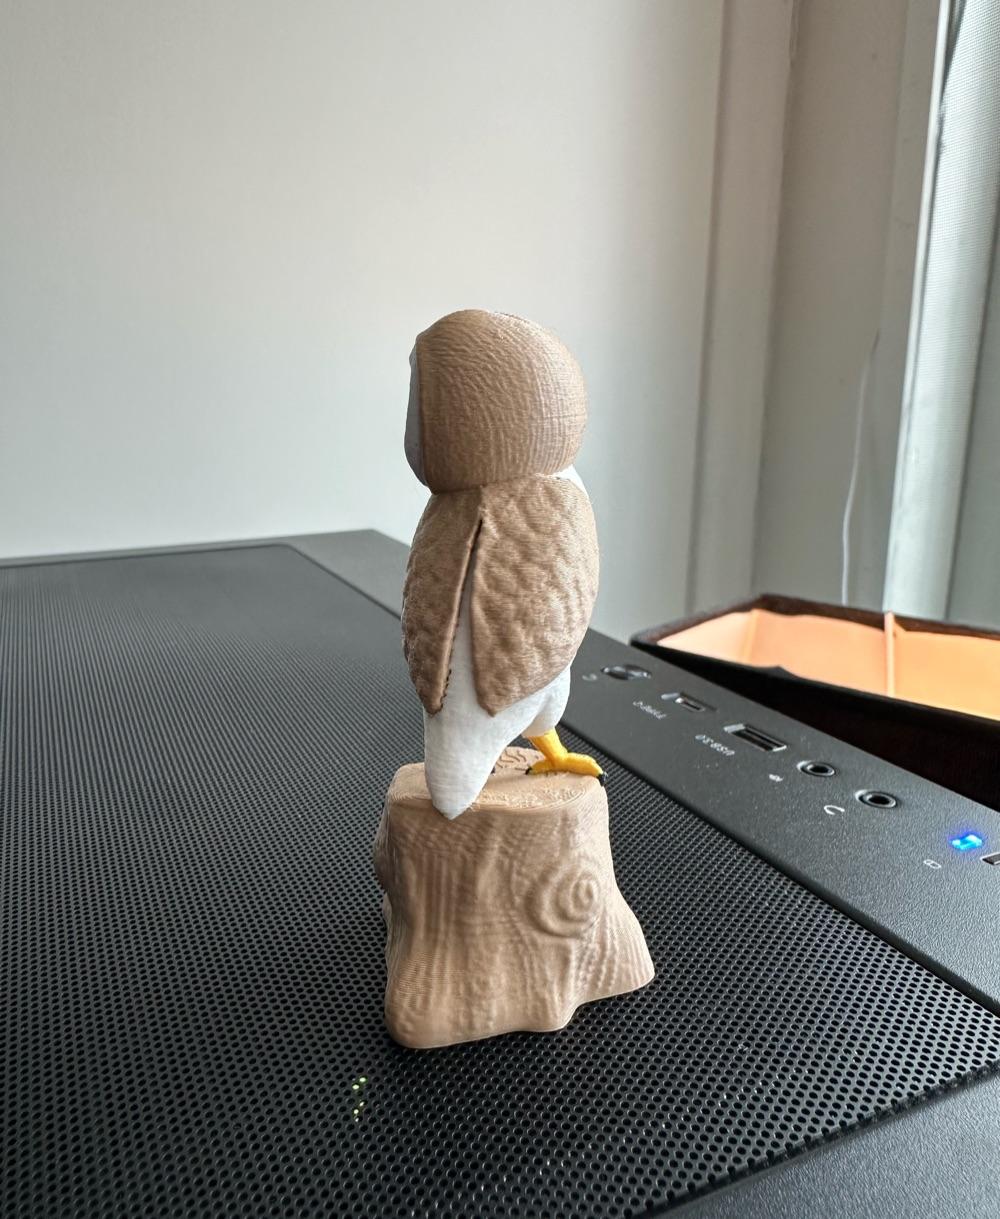 Owl Sculpture On Tree / 3MF / No Supports 3d model